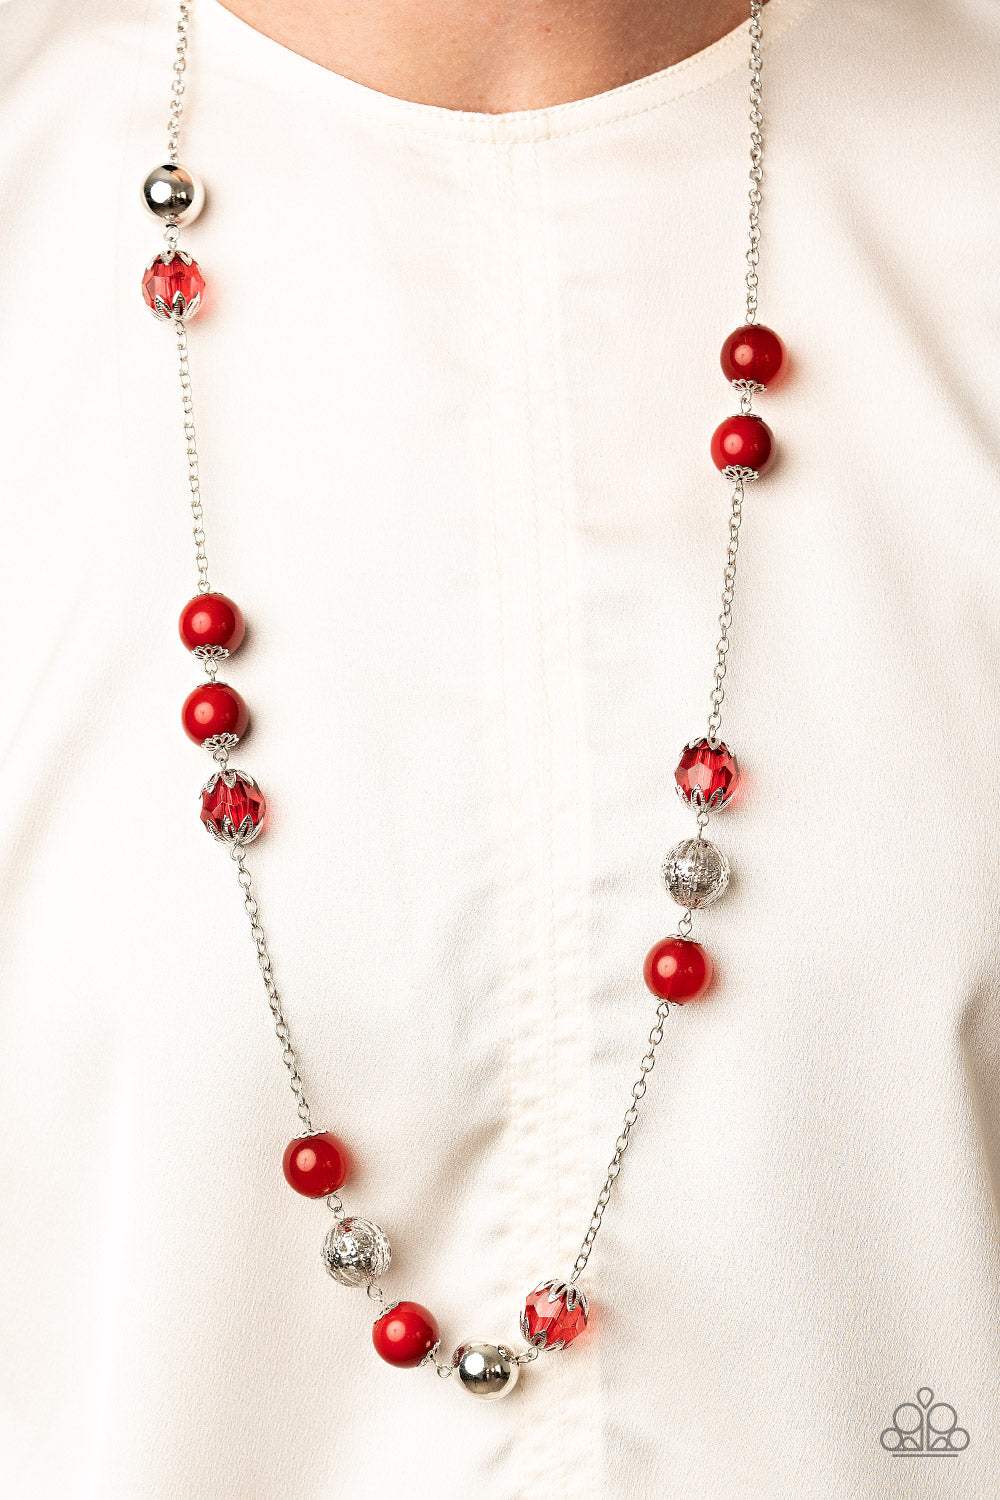 Fruity Fashion - red - Paparazzi necklace